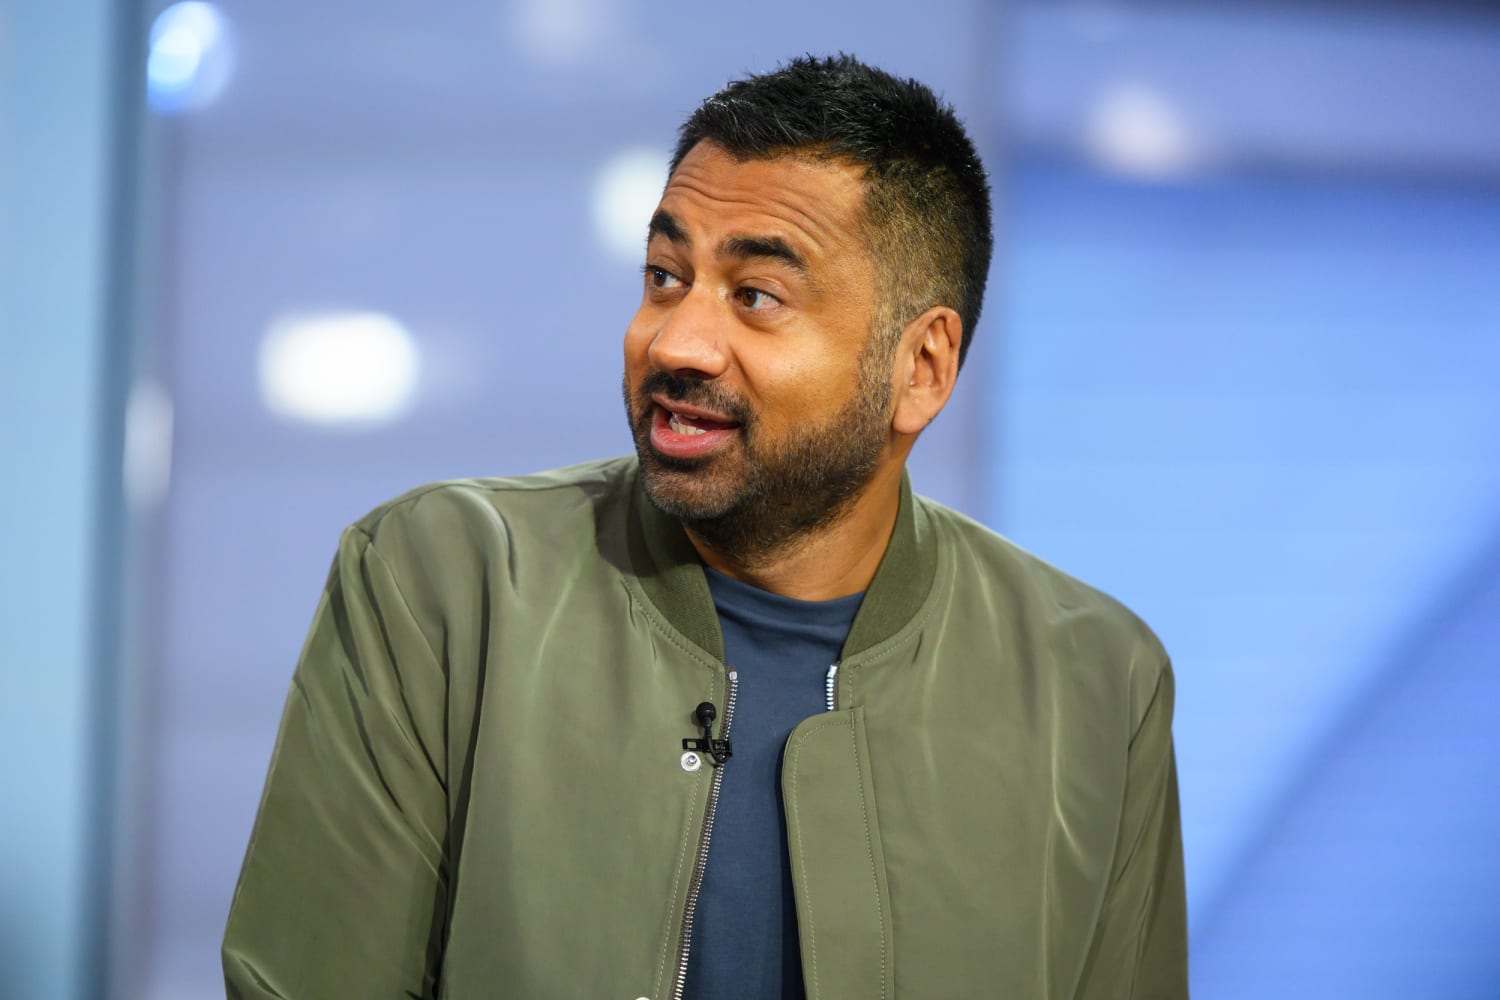 Kal Penn announces engagement to partner of 11 years in new book